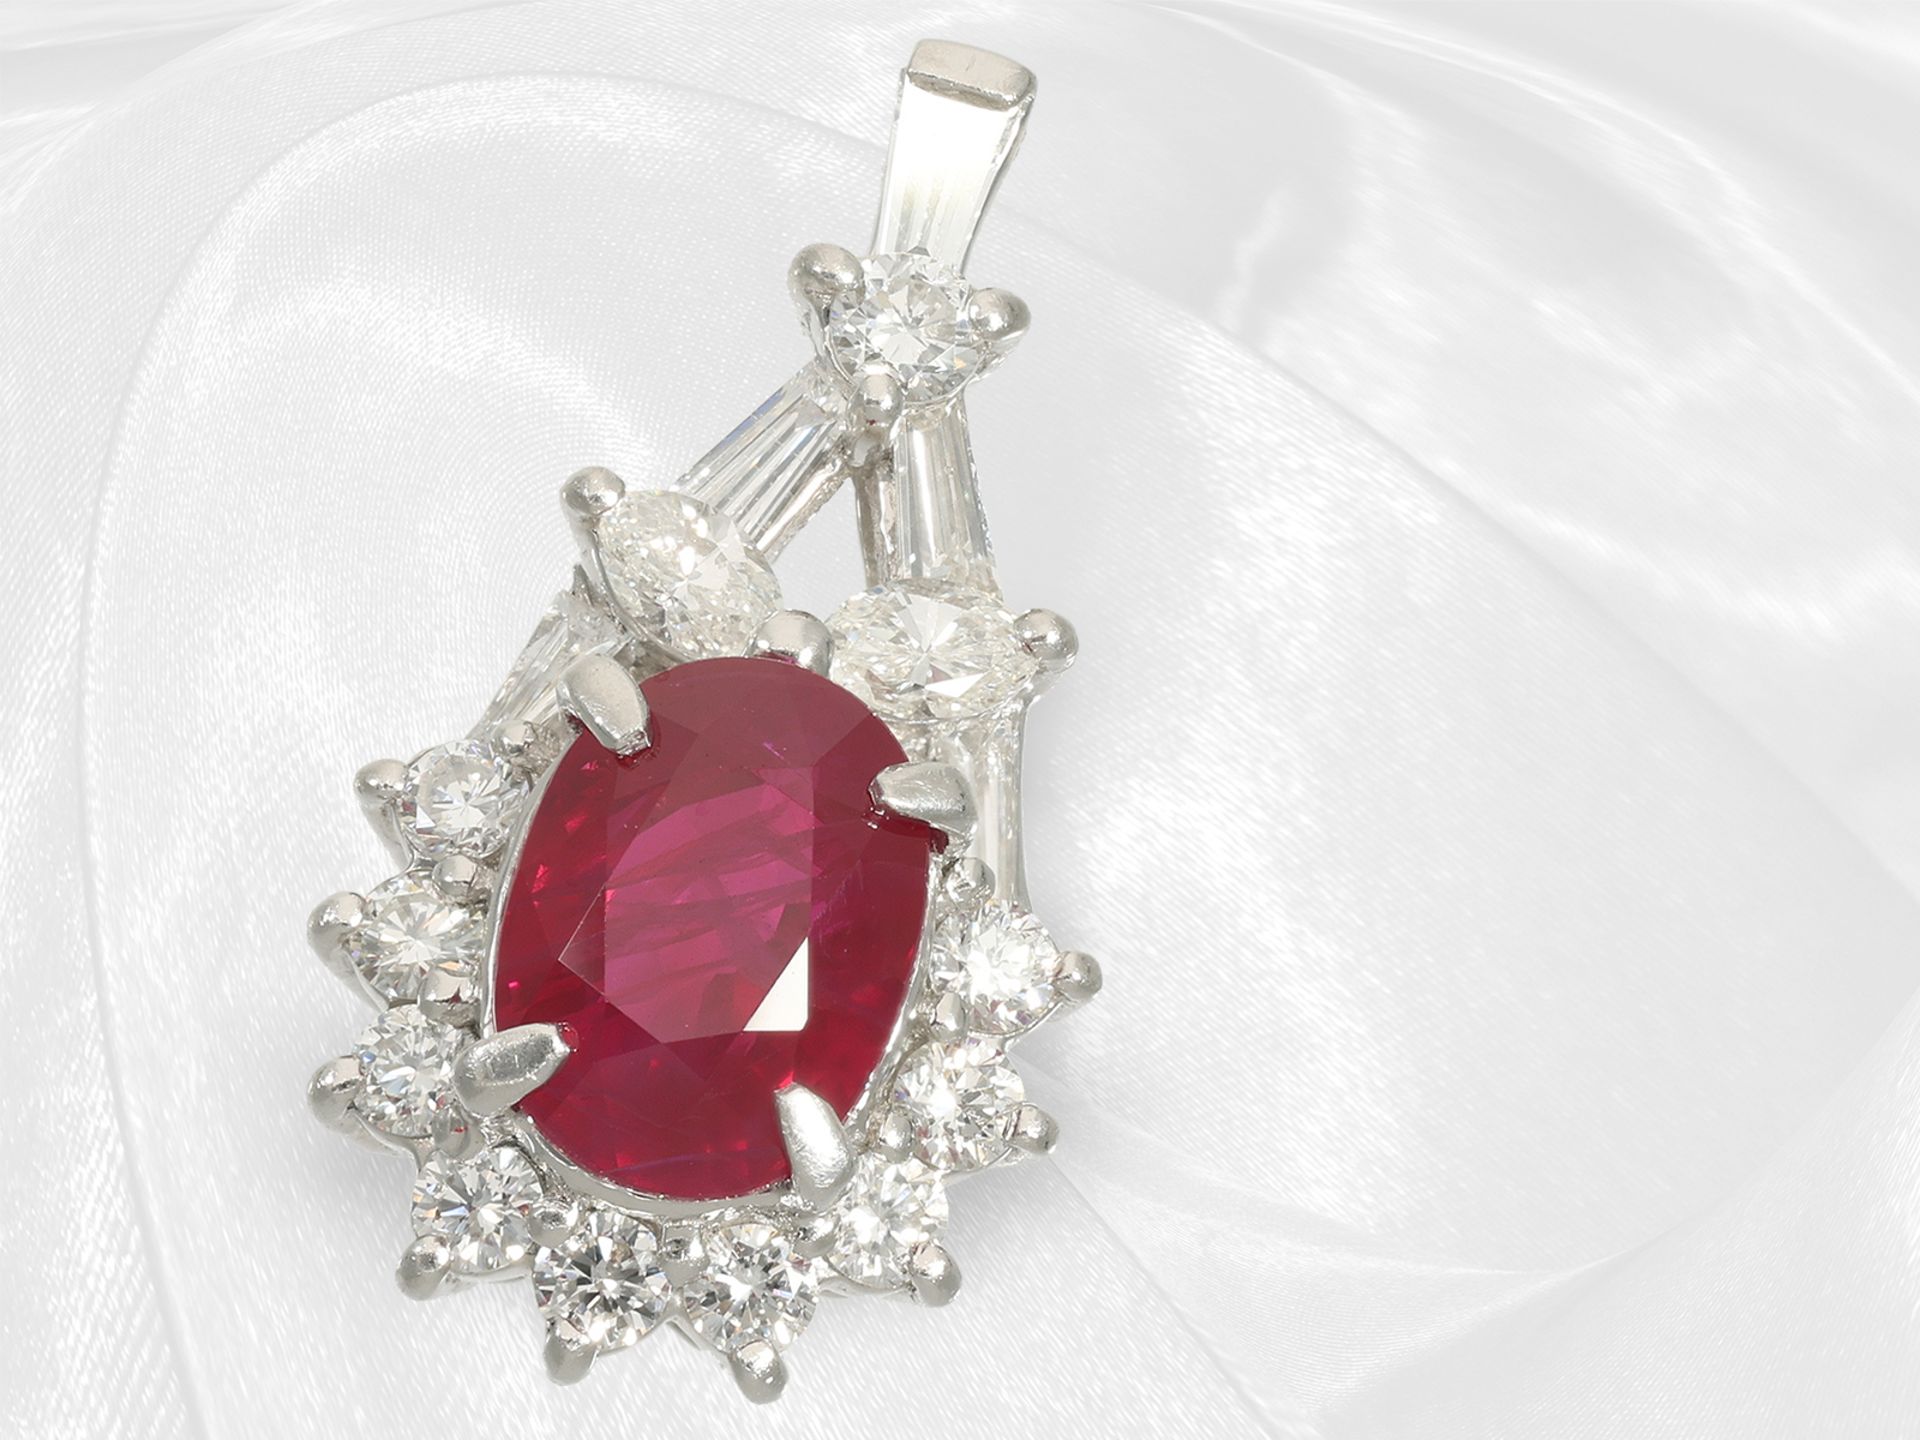 Necklace/pendant: extremely fine platinum jewellery, extremely rare Burma Ruby 2ct "Vivid Red-Pigeon - Image 2 of 4